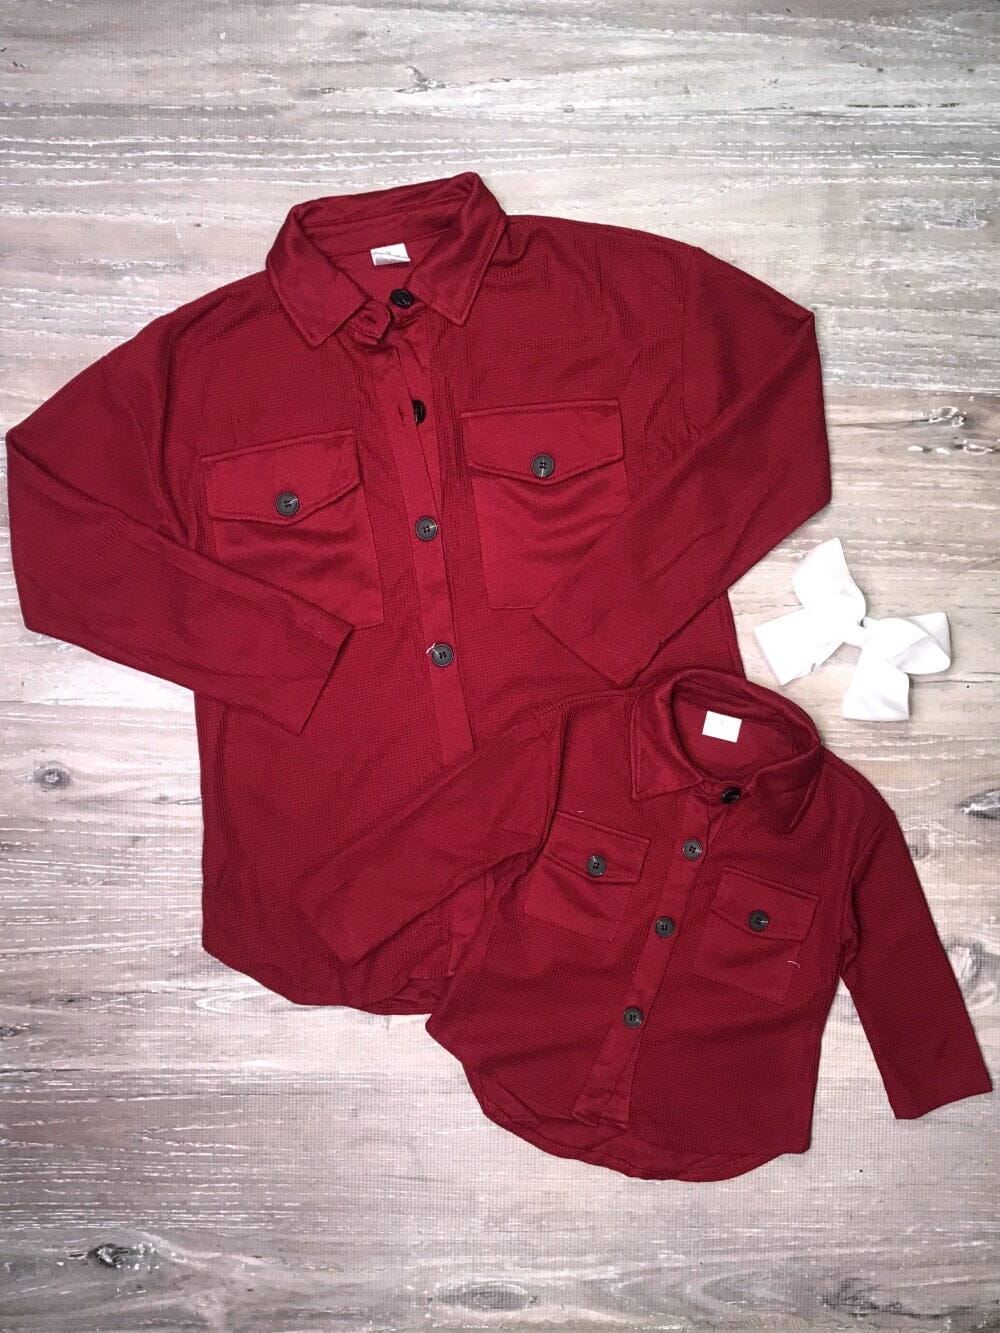 Mommy and Me - Burgundy Thermal Knit Matching Button Ups - Sydney So Sweet